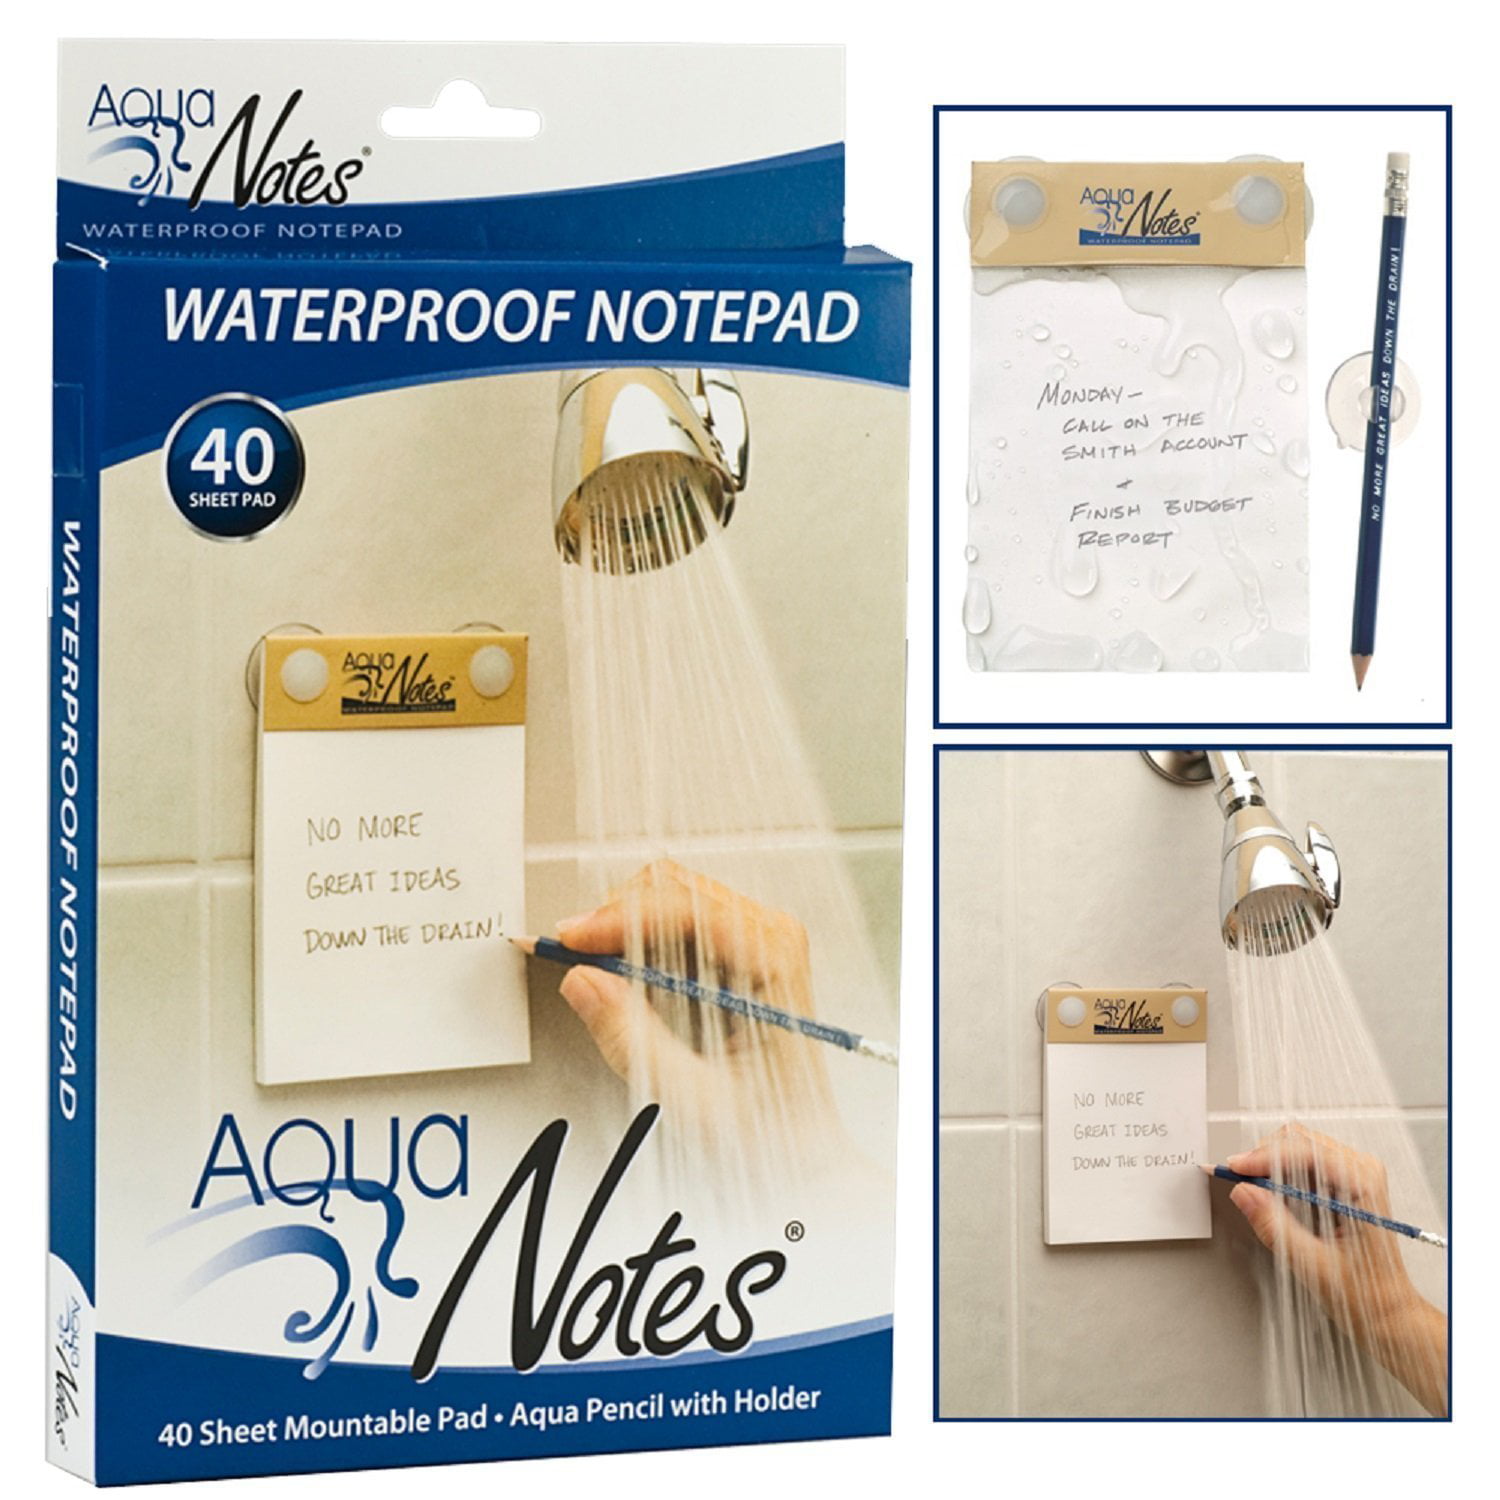 AquaNotes Waterproof Notepads, Pencils, Notebooks & Posters. Free